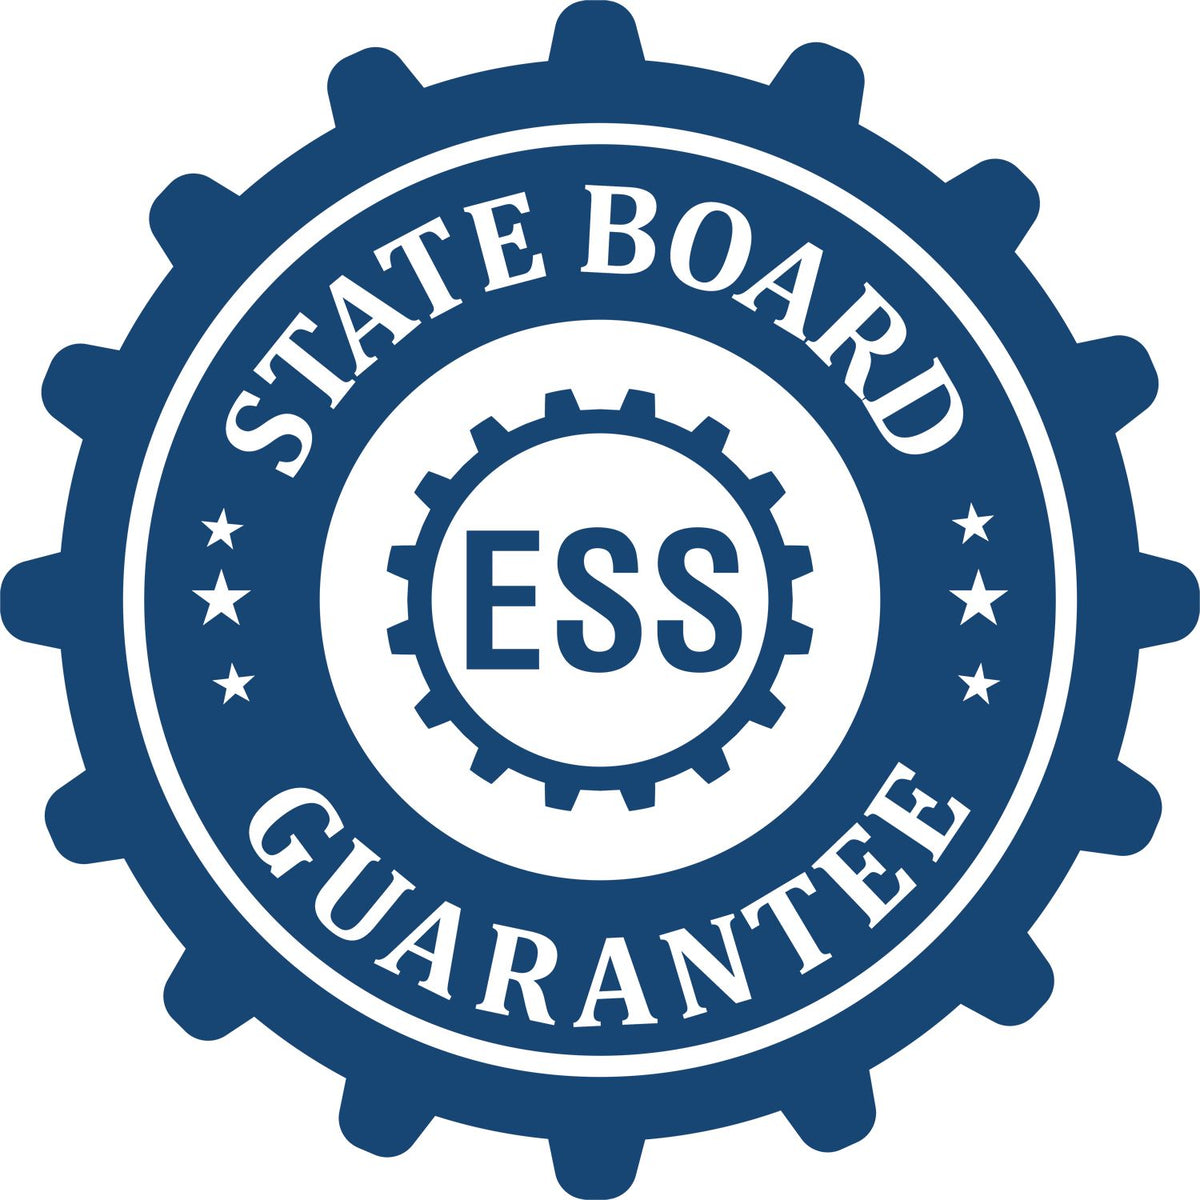 An emblem in a gear shape illustrating a state board guarantee for the Hybrid Delaware Land Surveyor Seal